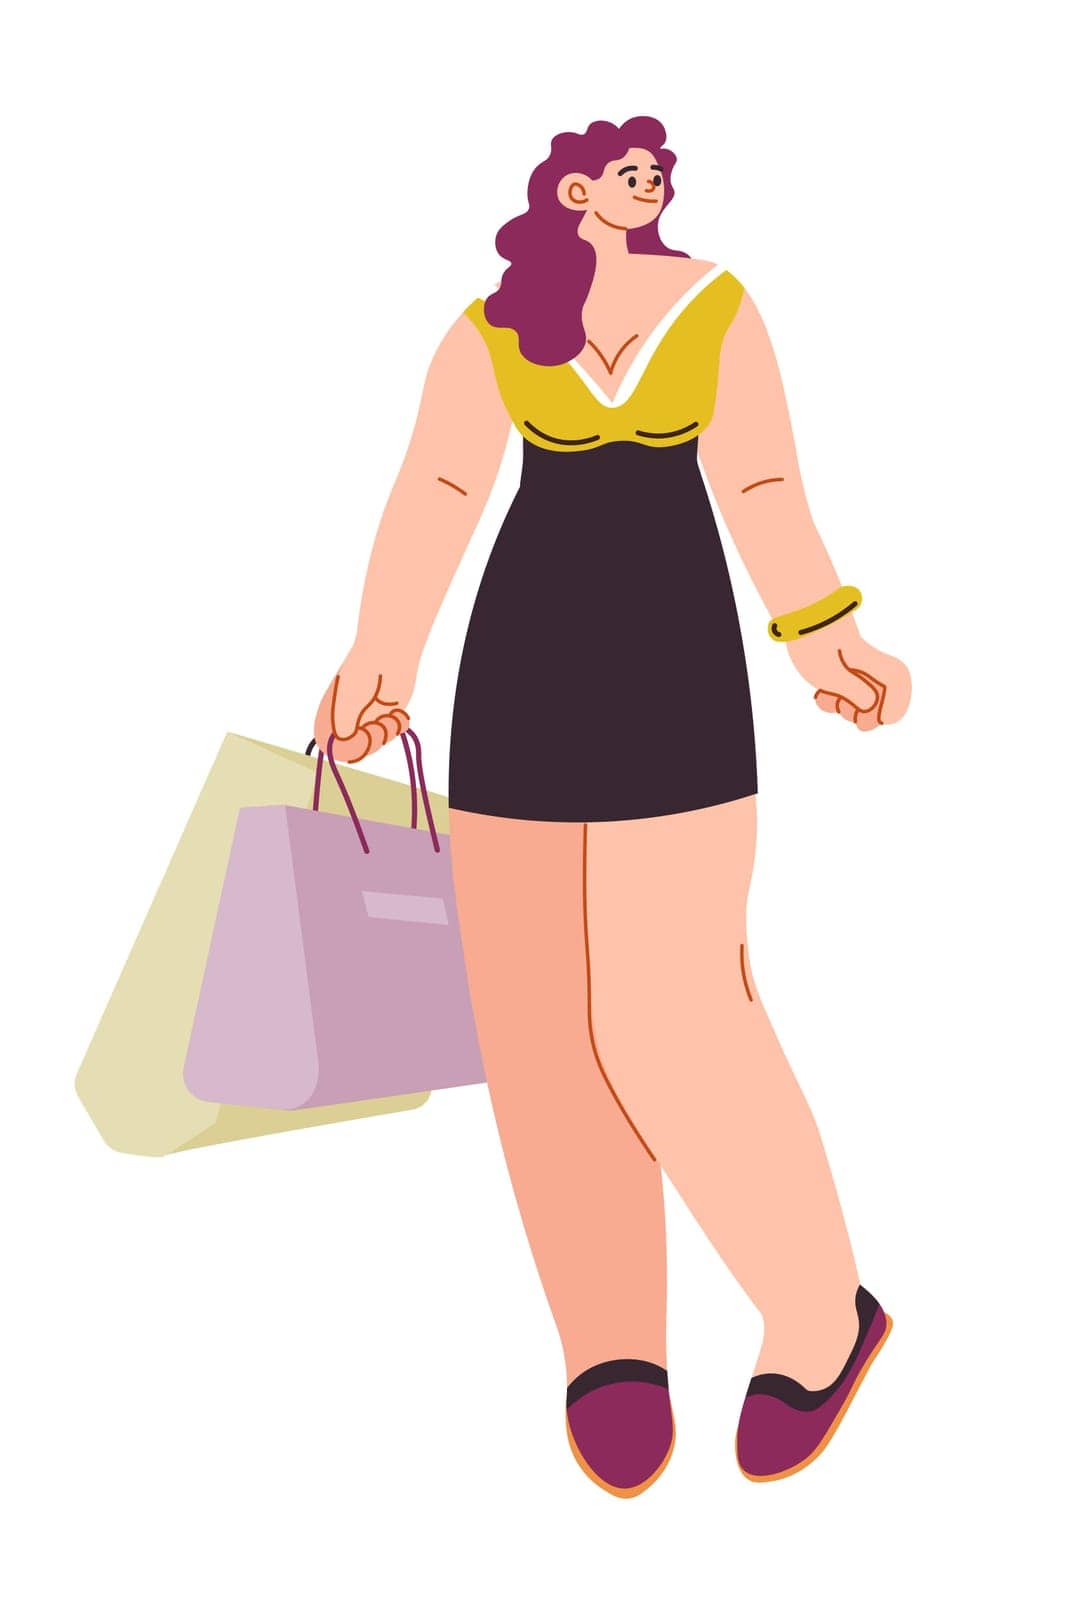 Shopping woman carrying bags, female character by Sonulkaster